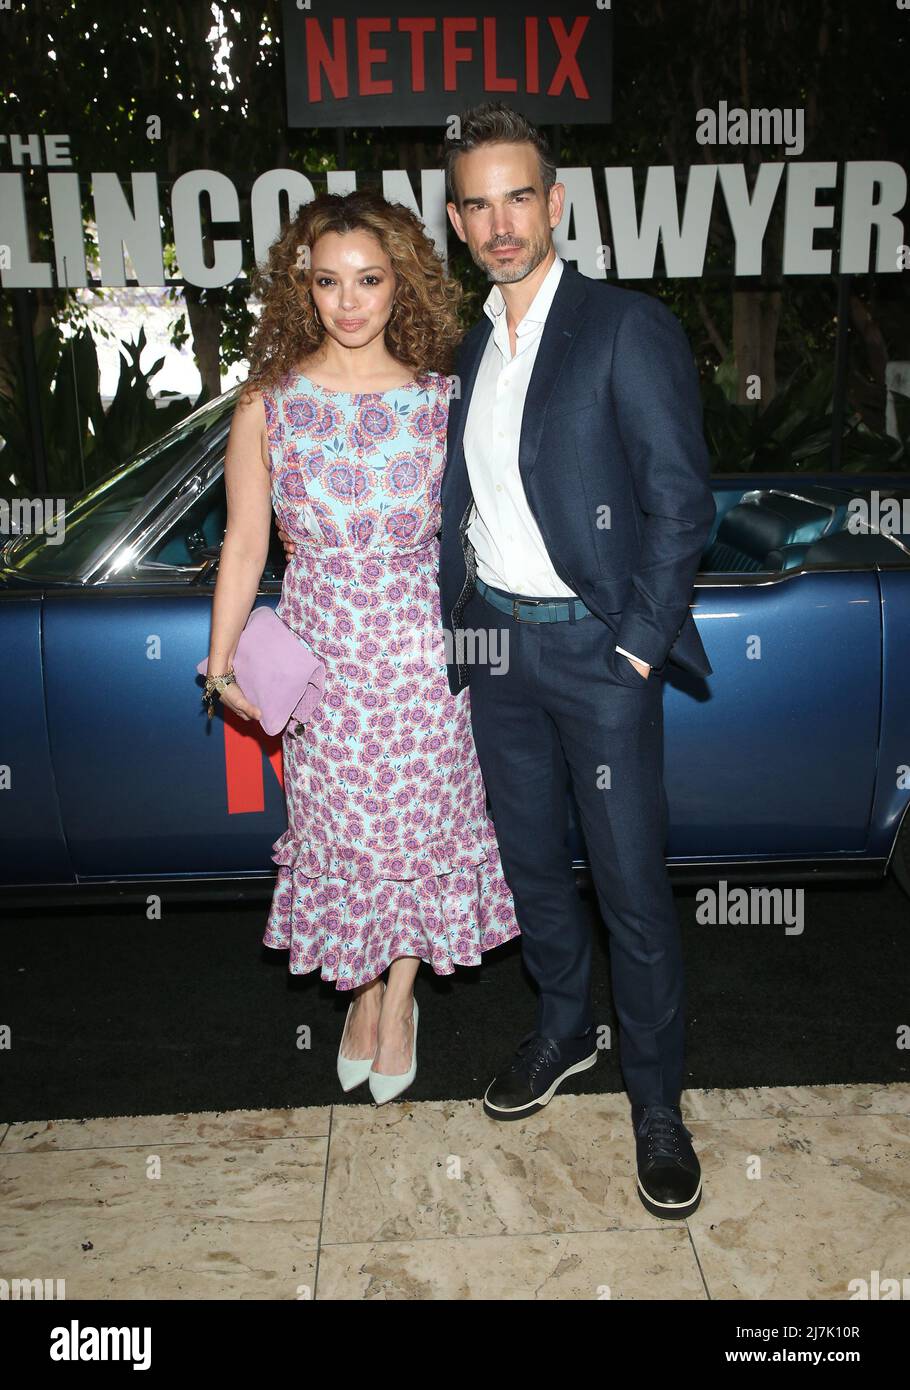 West Hollywood, California, USA. 9th May, 2022. Anel Lopez Gorham, Christopher Gorham. The Netflix Premiere of The Lincoln Lawyer held at The London West Hollywood. Credit: FS/AdMedia Photo via/Newscom/Alamy Live News Stock Photo